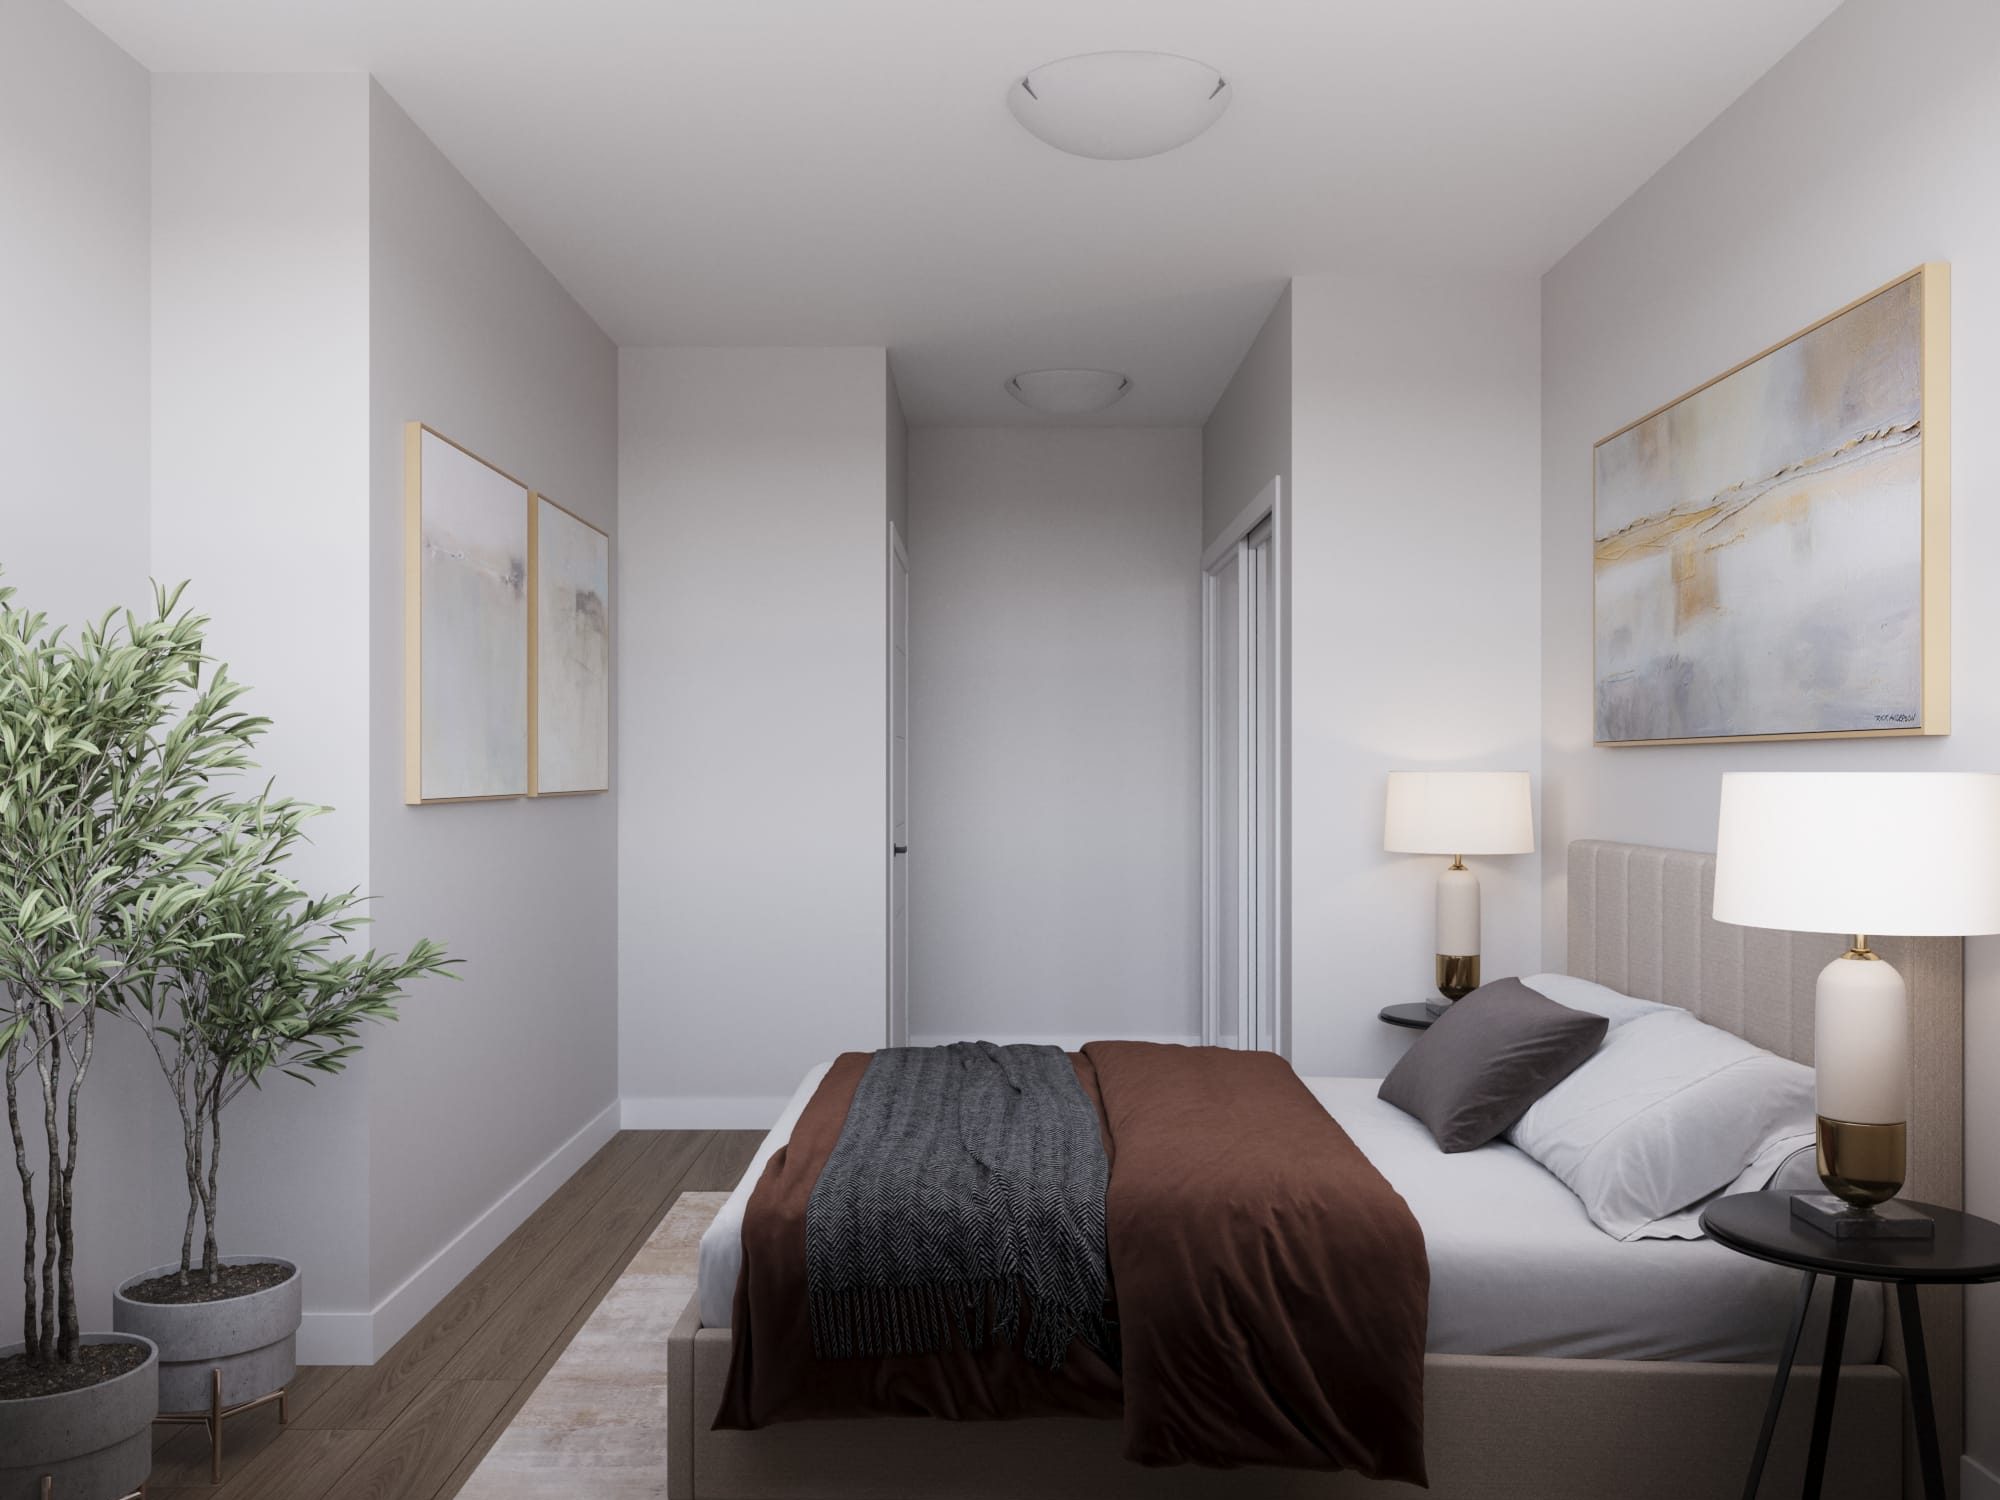 Modern, spacious bedroom at The Cornerstone apartment unit